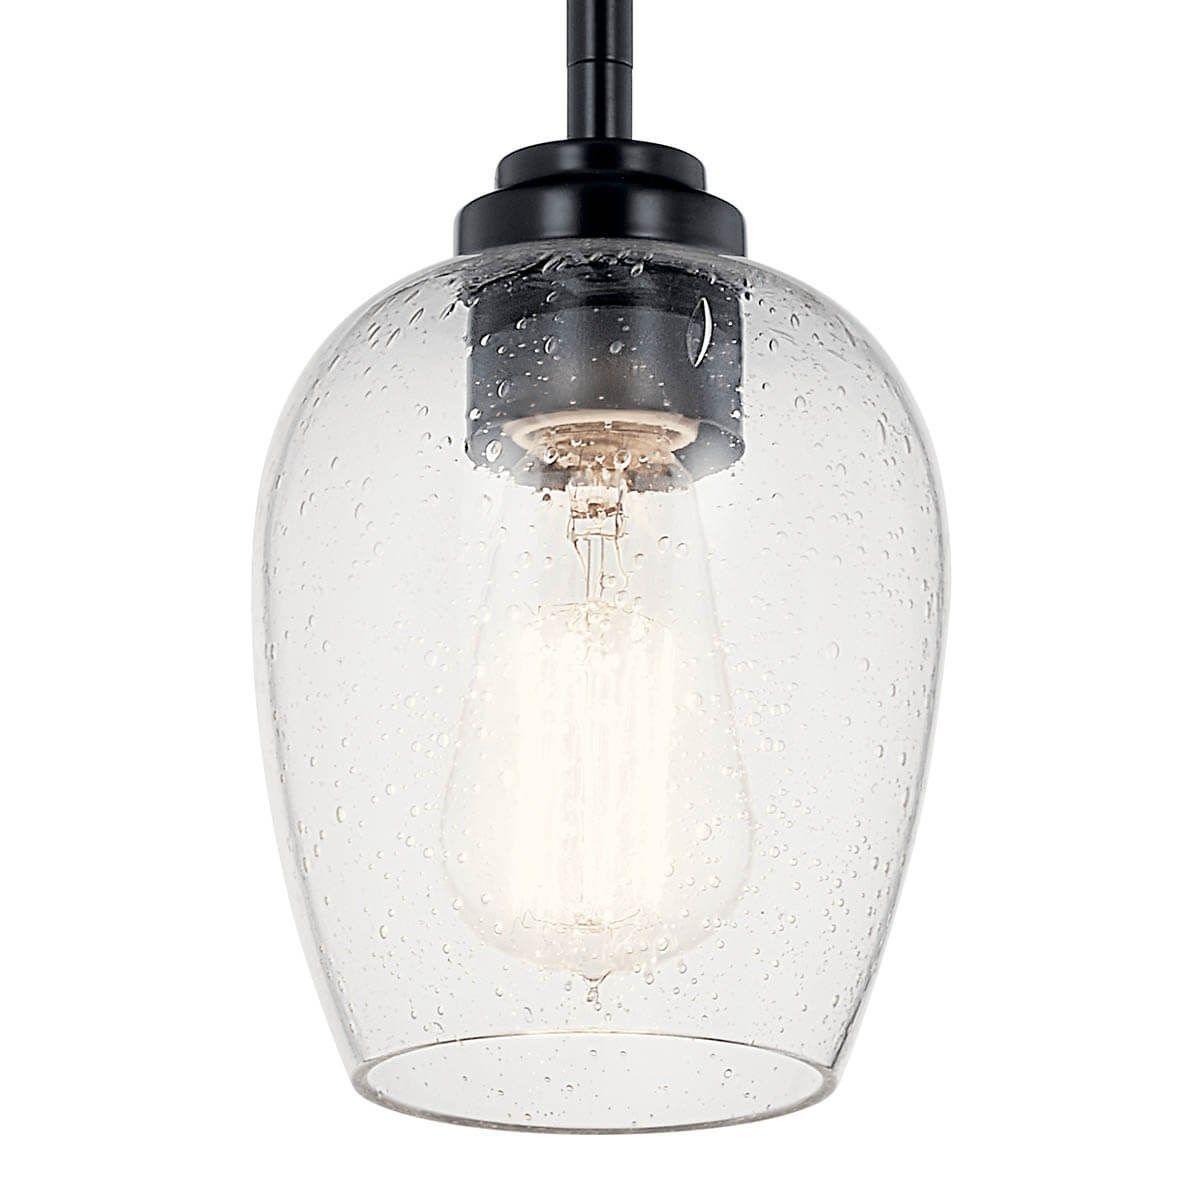 Valserrano 5 in. Pendant Light with clear seeded glass - Bees Lighting